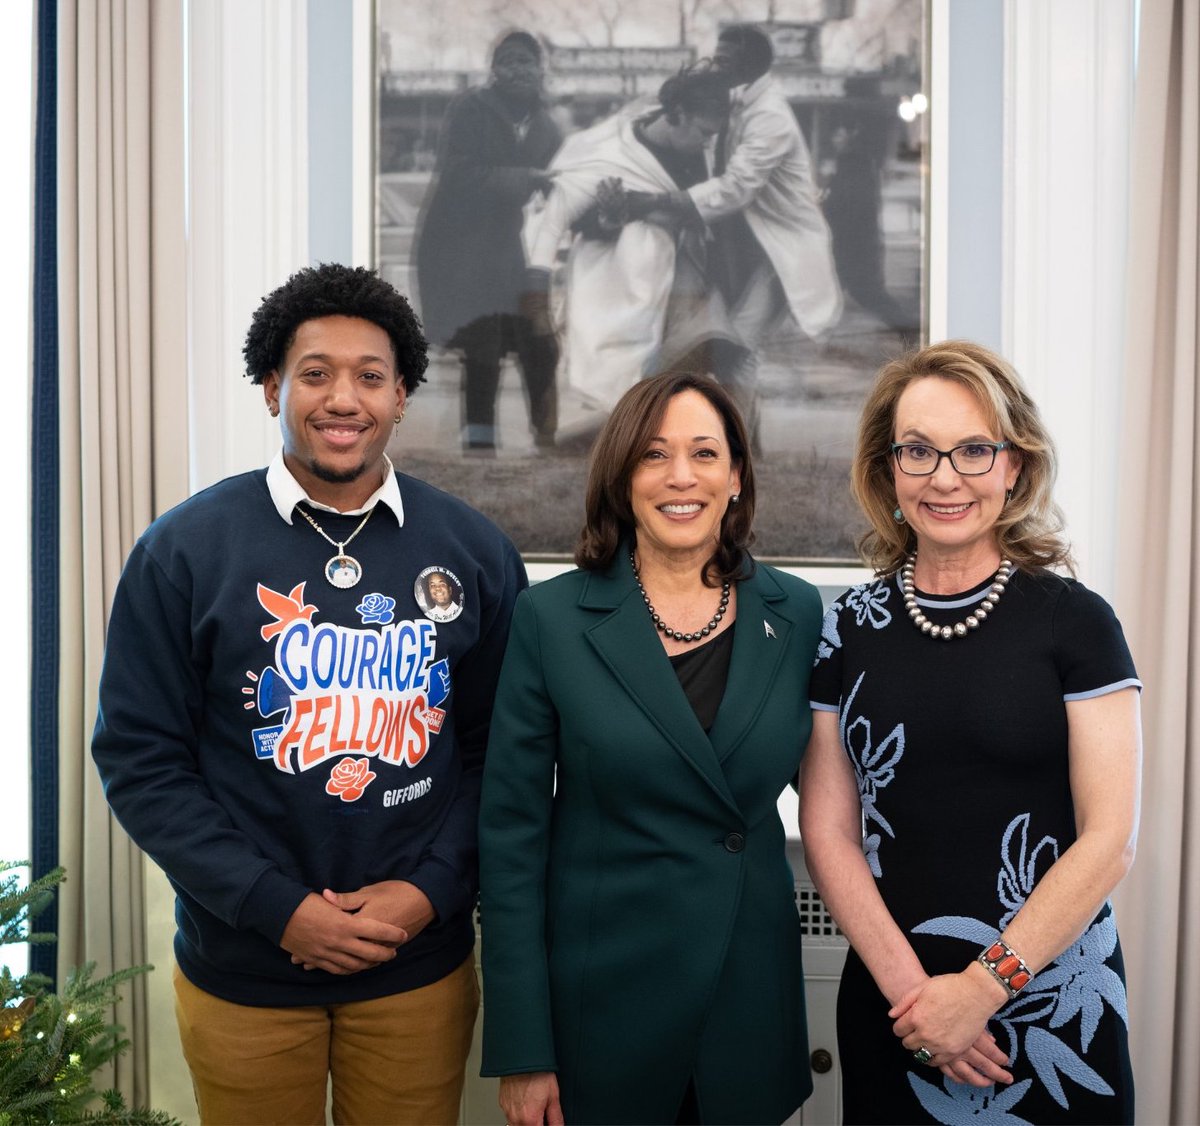 It was my honor to spend time with @GabbyGiffords and gun safety advocate Trevon Bosley to discuss our continued work to end gun violence. We owe it to every victim and survivor, their families, and our communities to act.